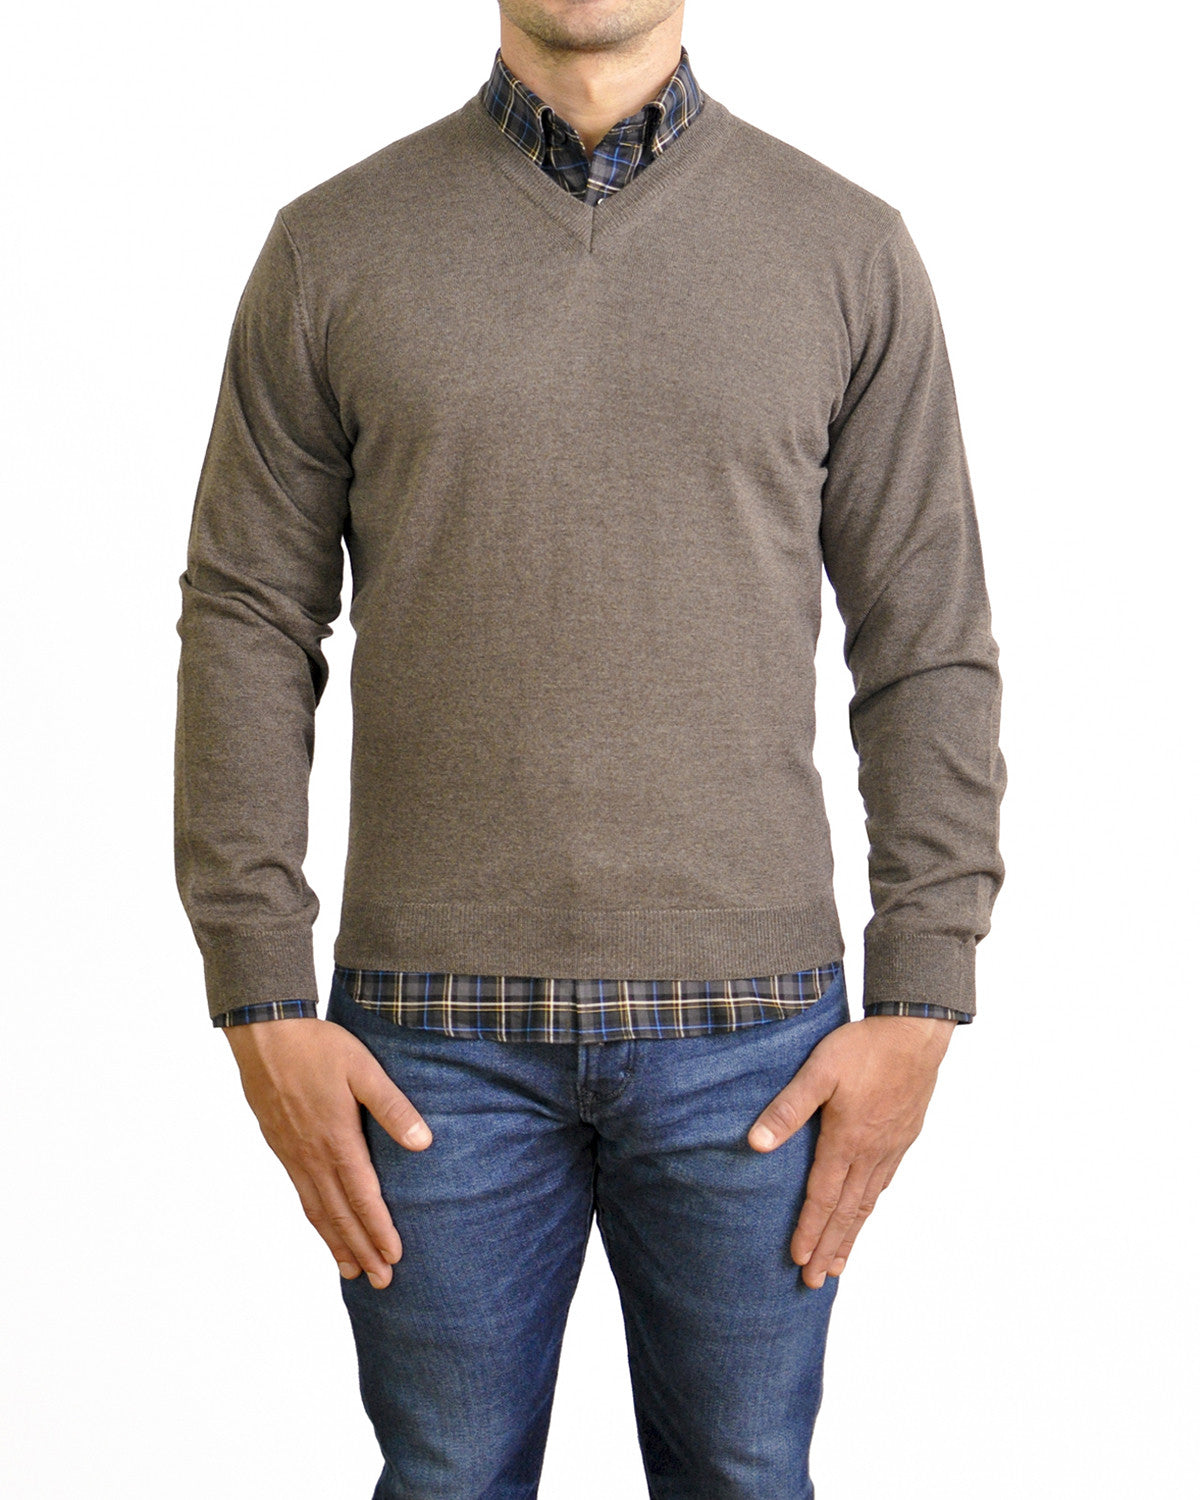 Dylan | Catalina Blue | Sweaters for Shorter Men 5' 9